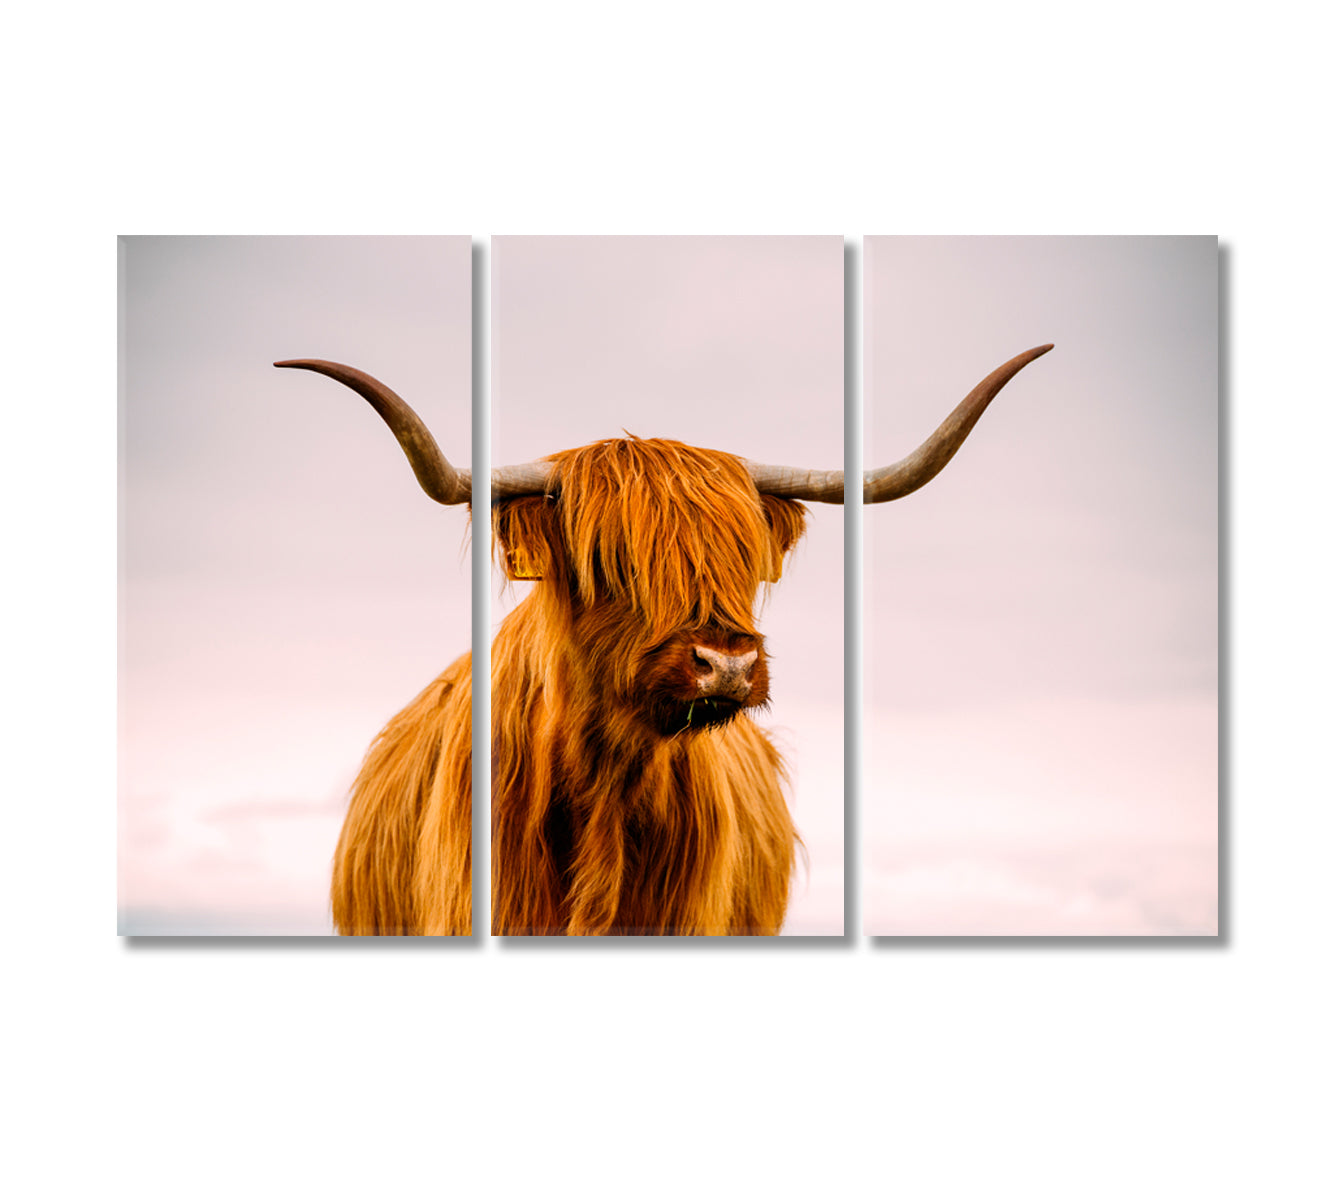 Highland Cow in Sunset Giclee Print-Canvas Print-CetArt-3 Panels-36x24 inches-CetArt